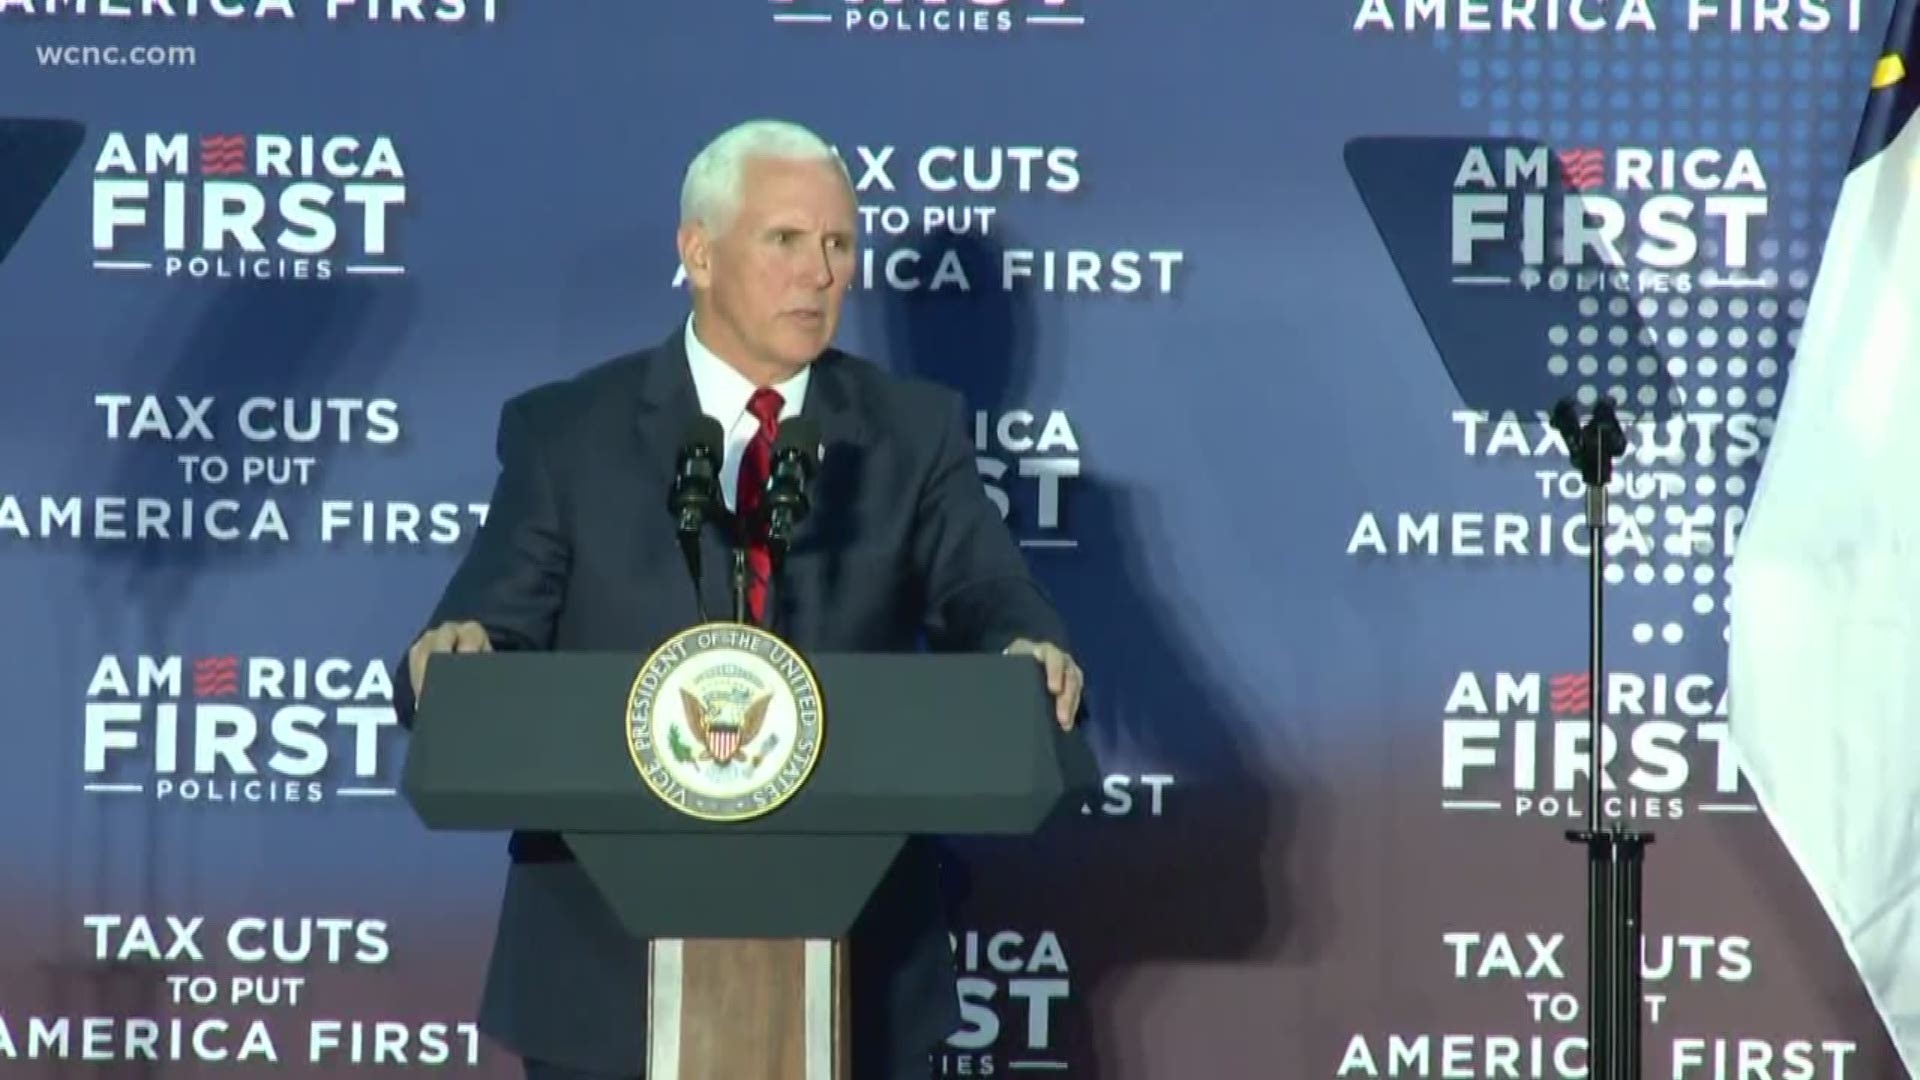 Vice President Mike Pence speaks about tax reform at America First Policies event.